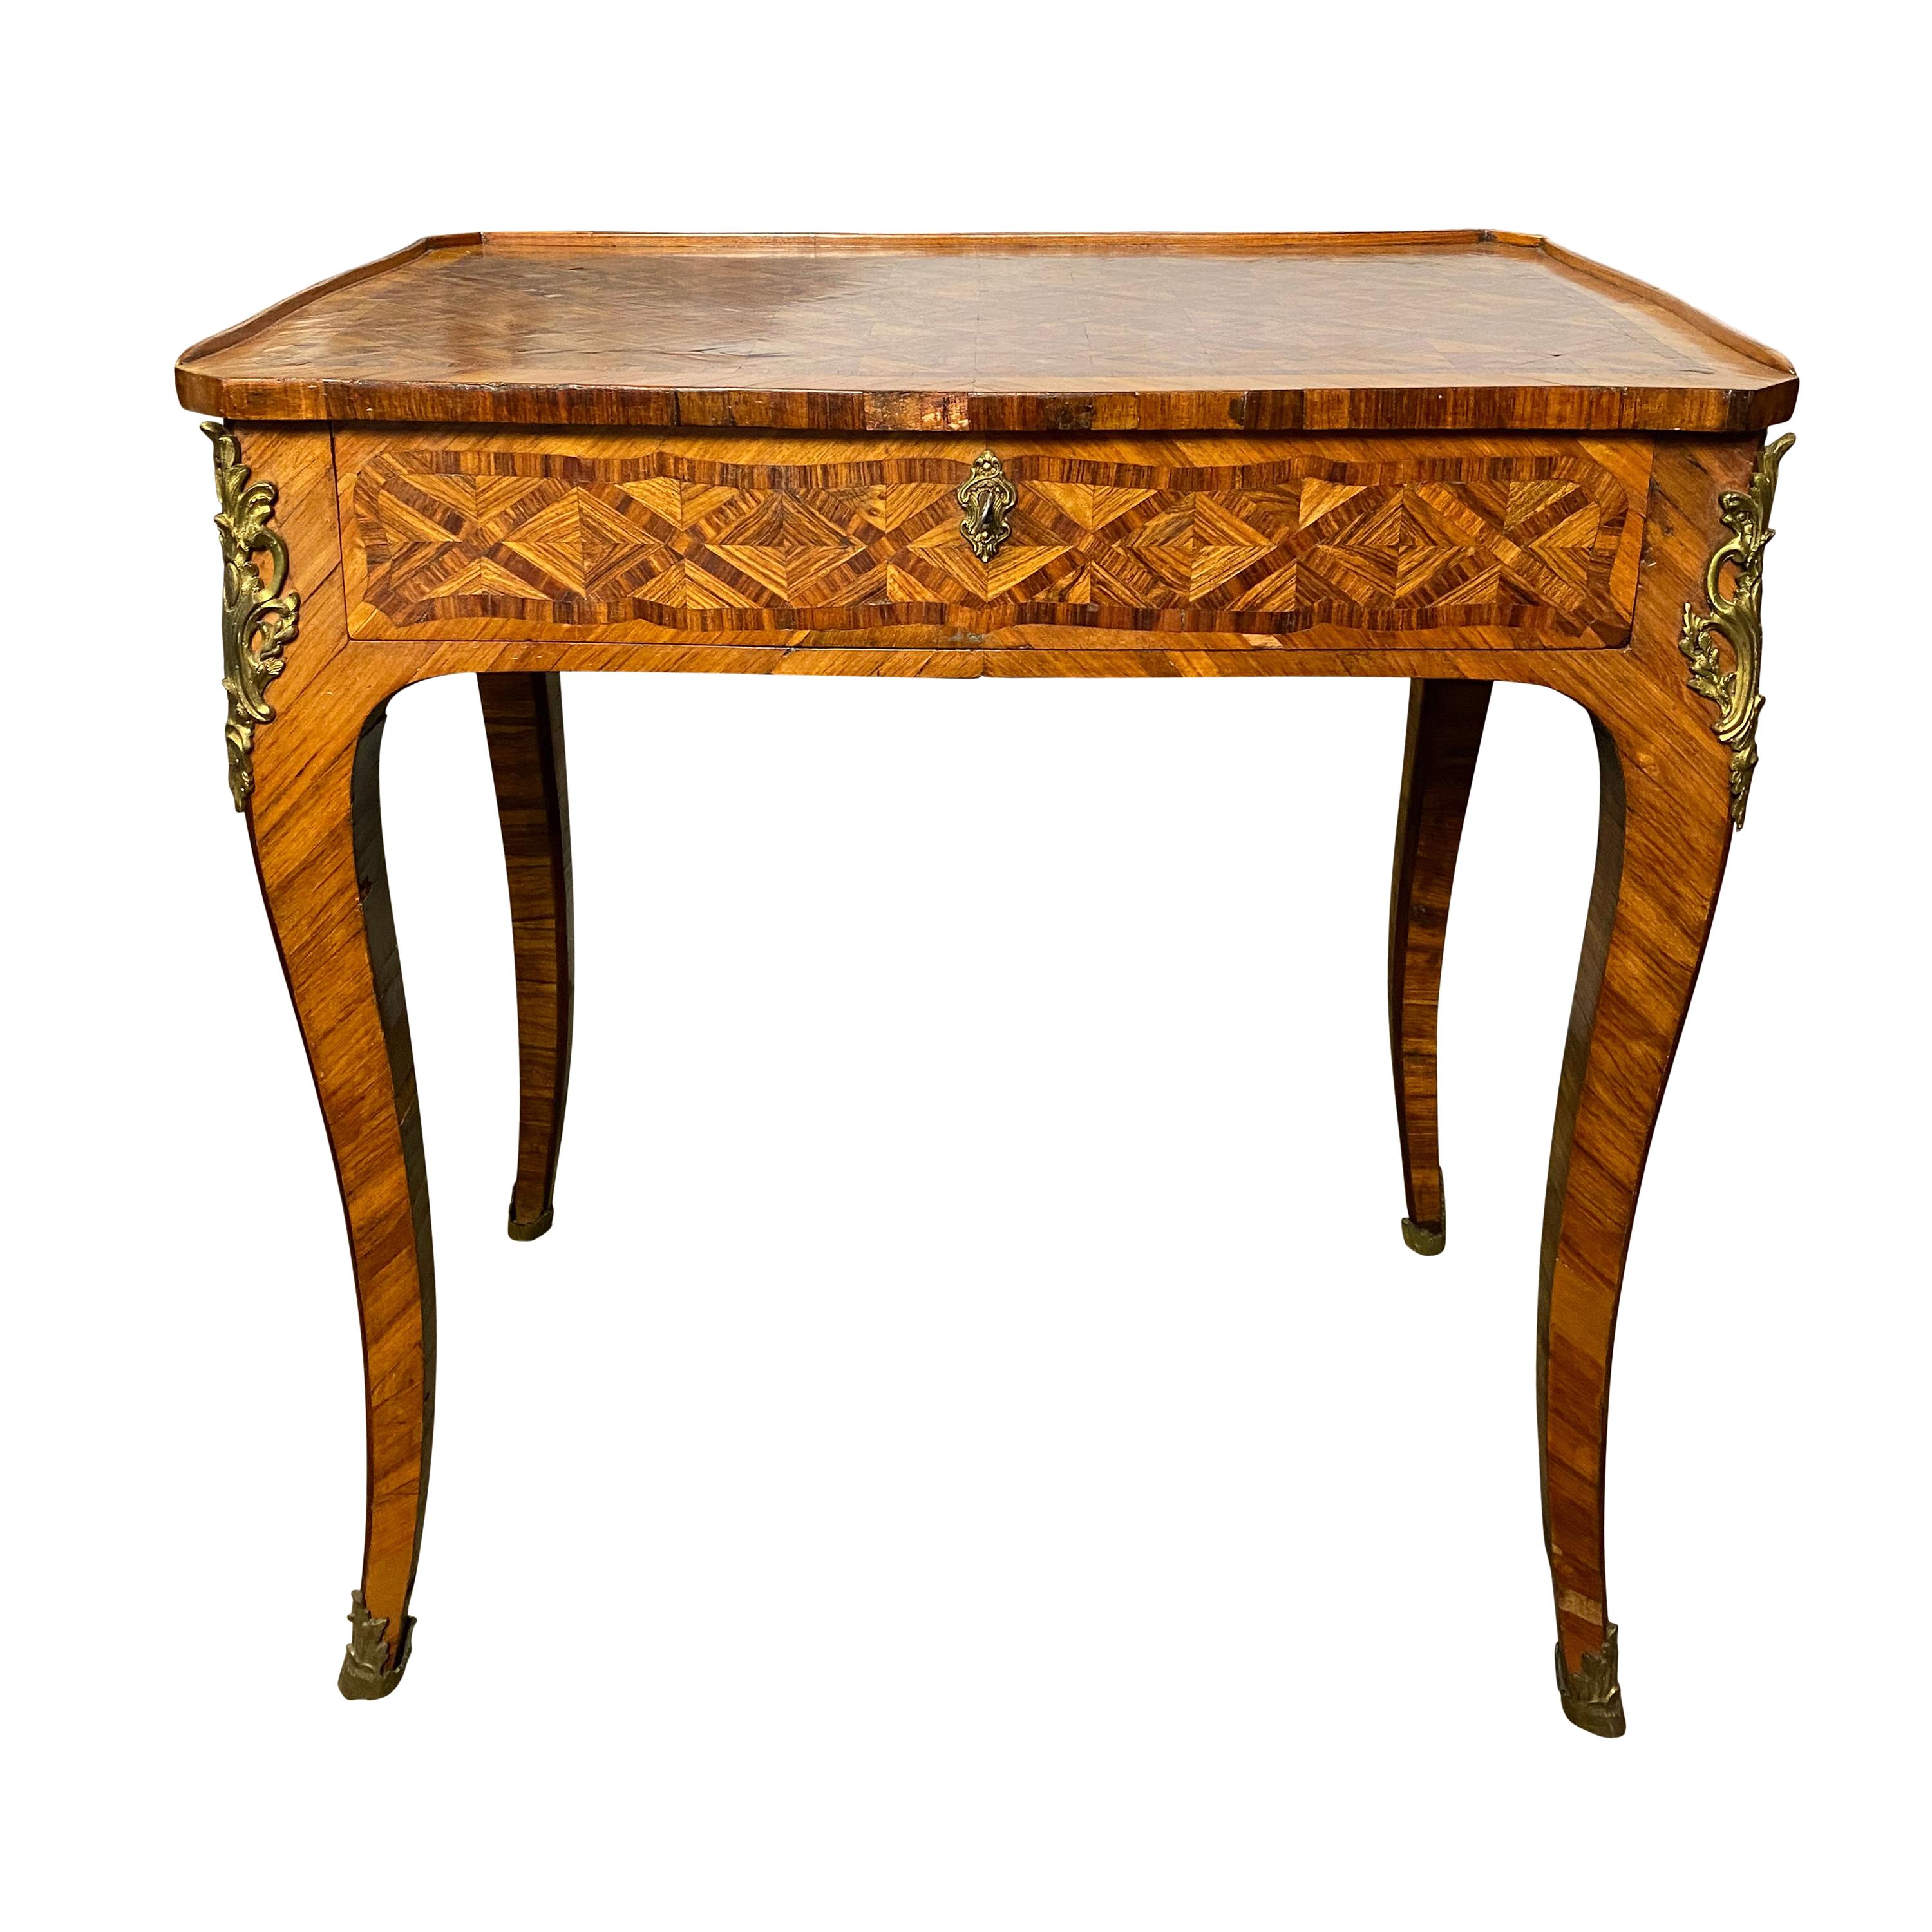 Marquetry Inlaid Kingwood Desk, 18th Century For Sale